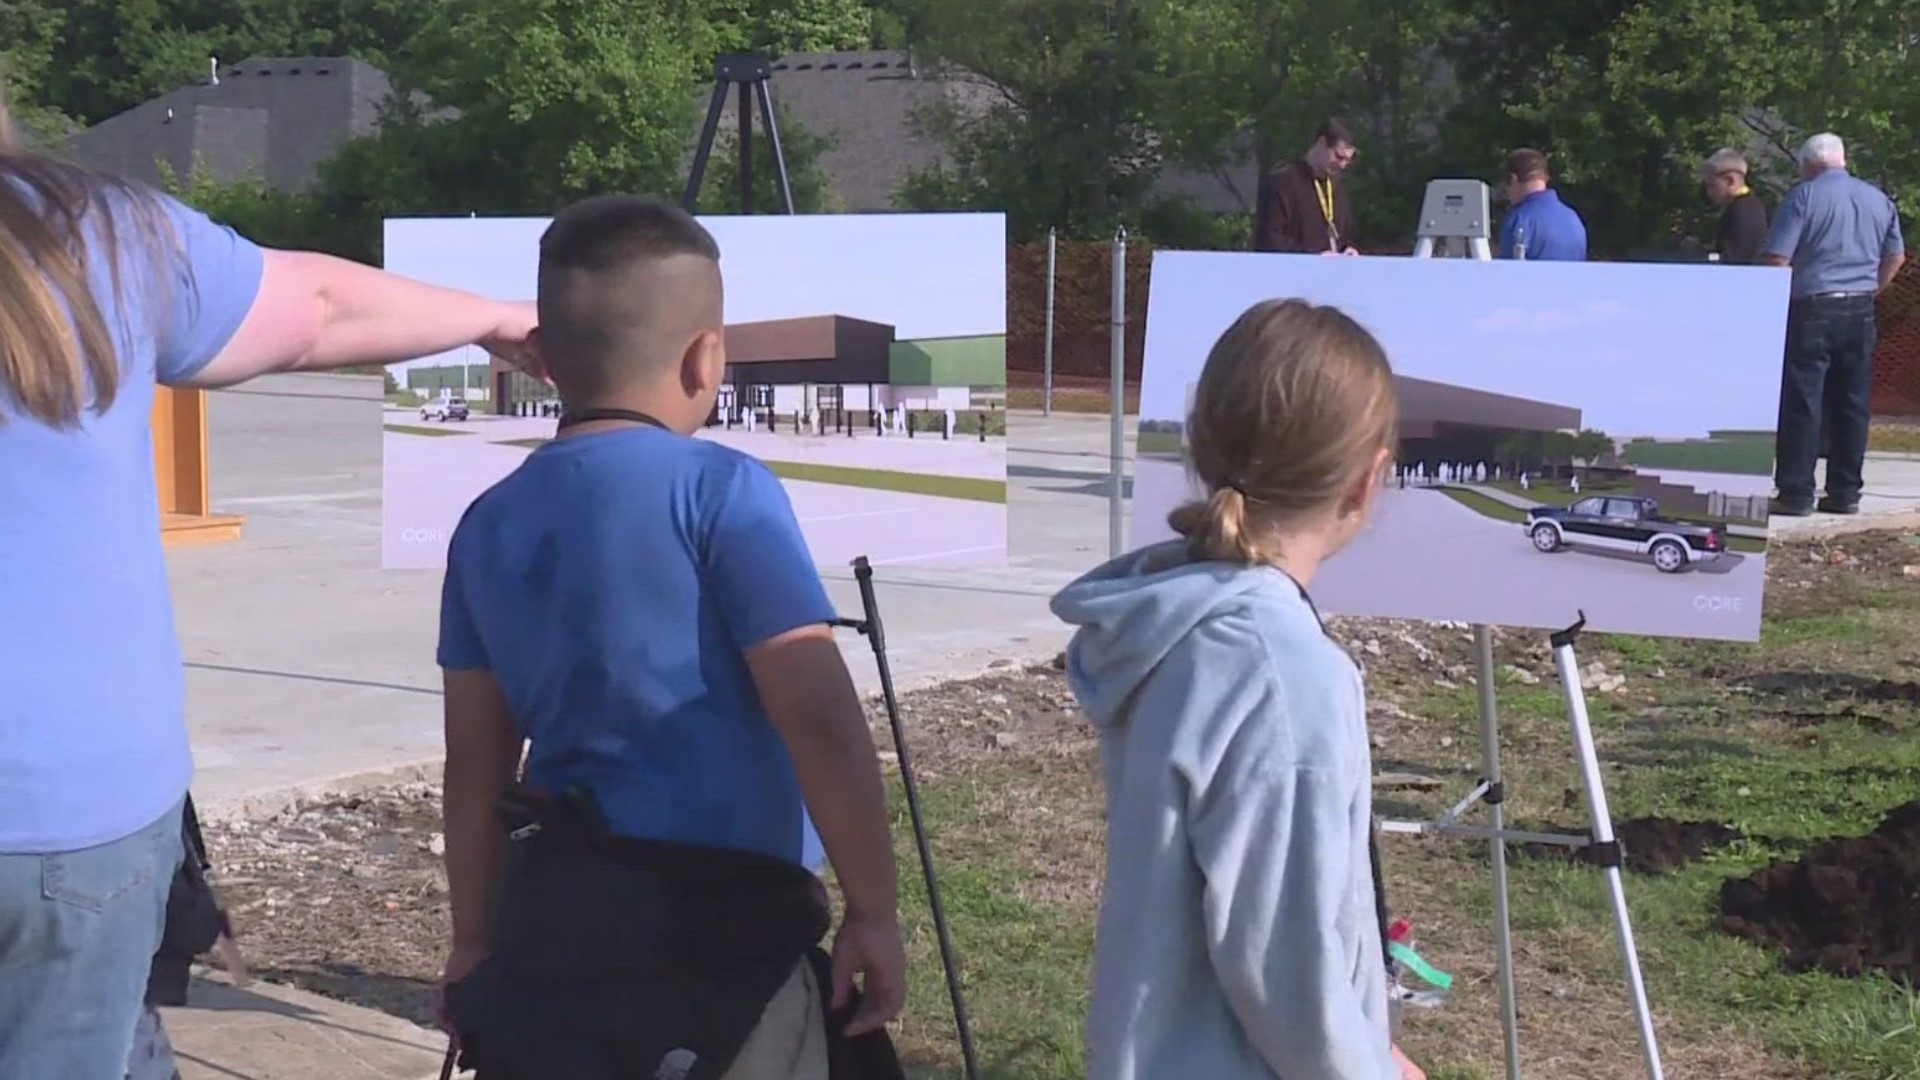 People in Springdale came together at George Elementary School for a groundbreaking ceremony to mark the start of renovations after it was hit by a tornado.